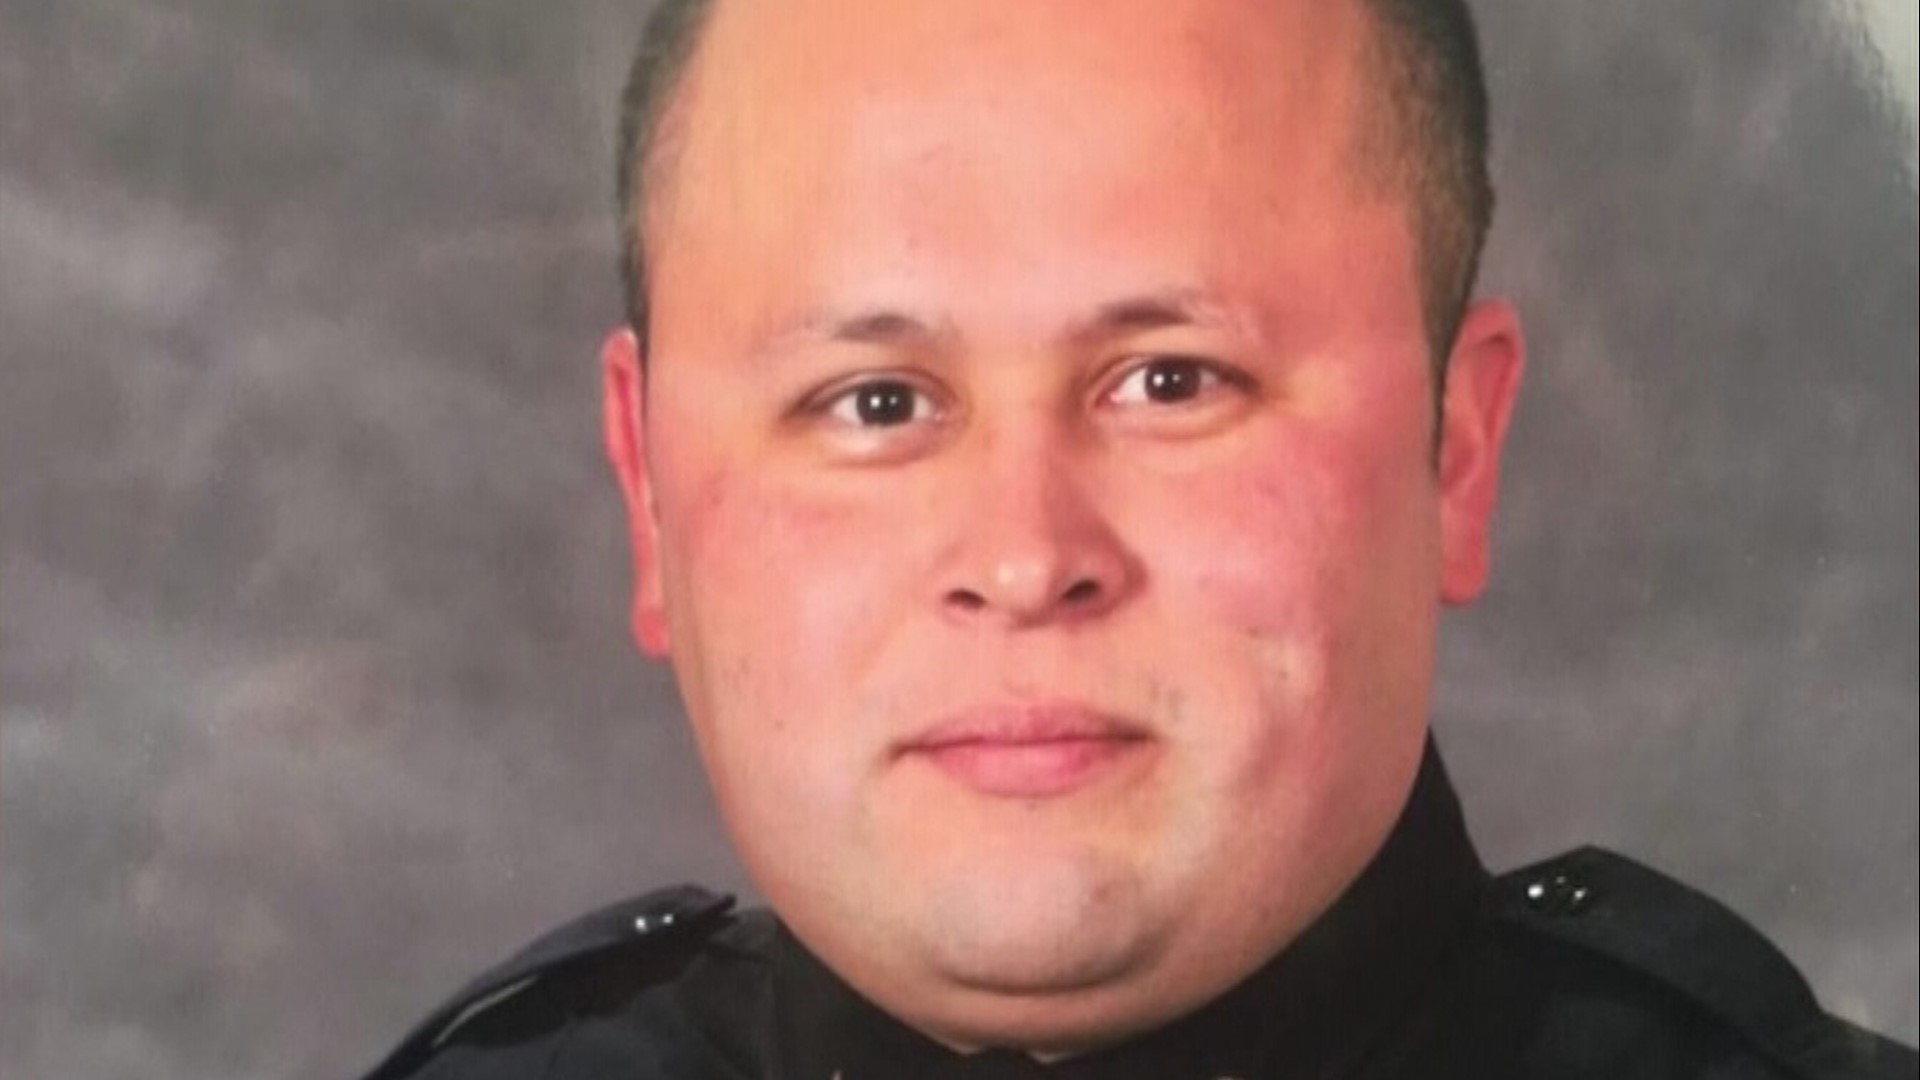 The Tacoma Police Department is facing a multi-million dollar claim stemming from the death of officer Jake Gutierrez in 2016.